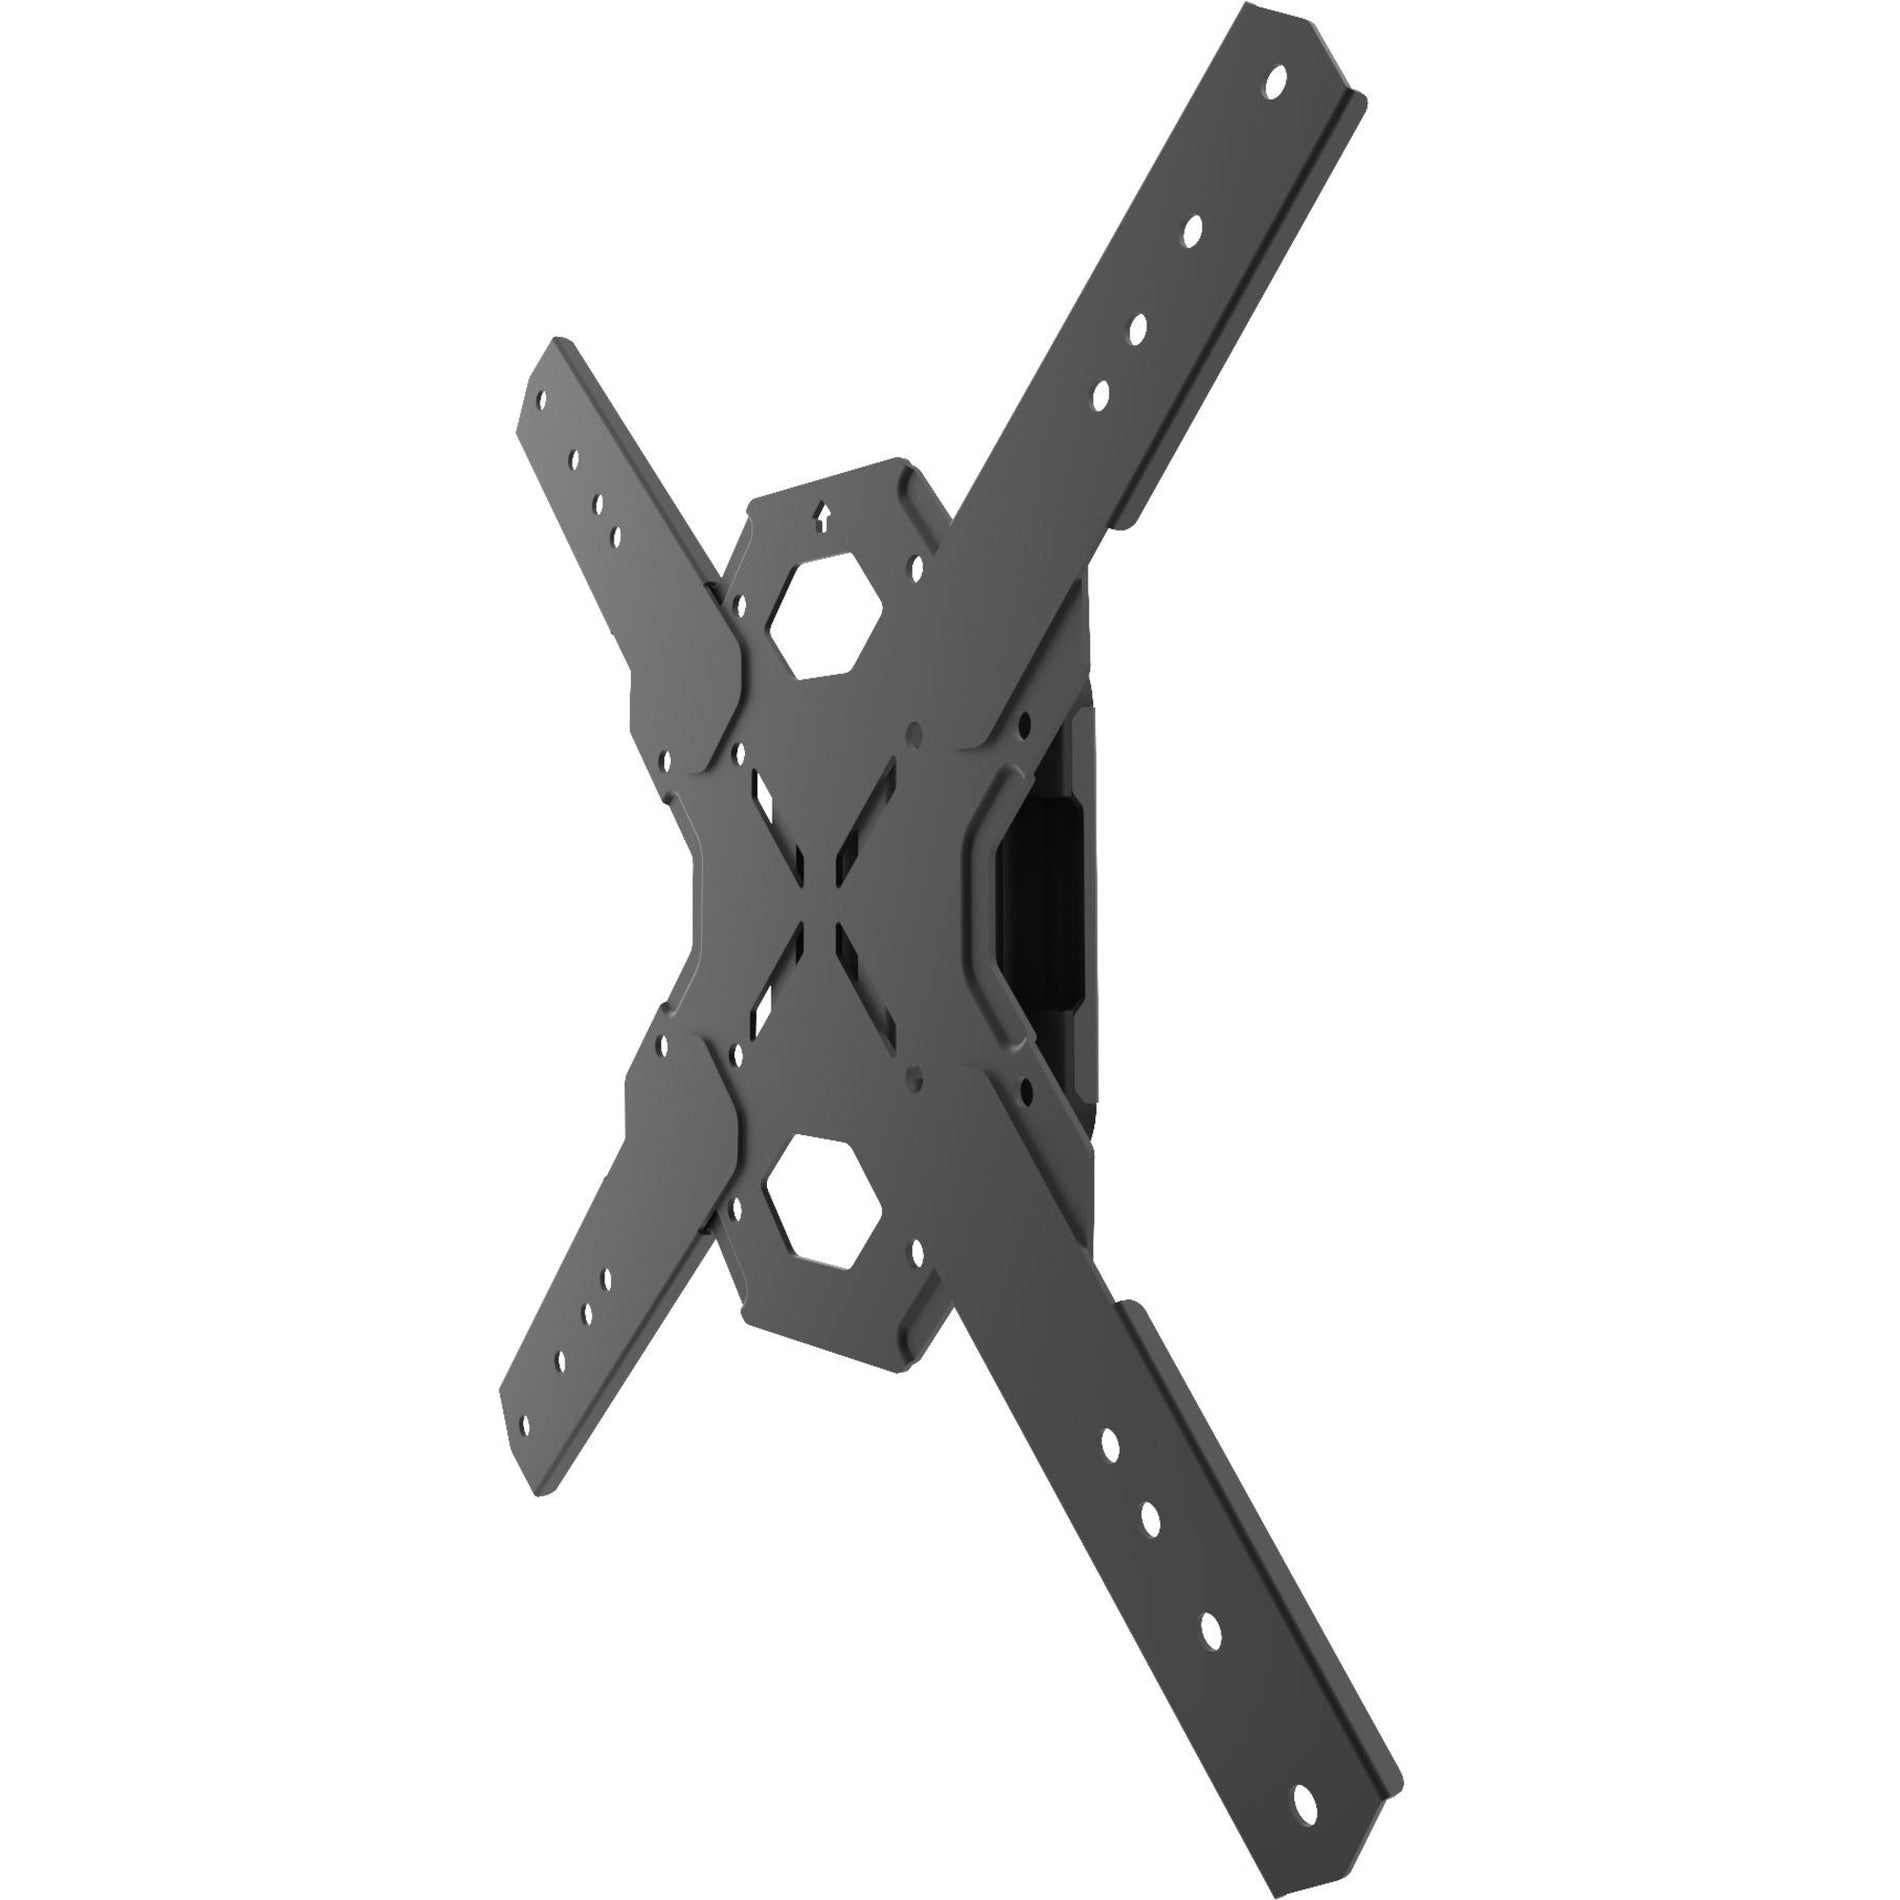 Kanto PS100 Tilt and Swivel TV Wall Mount for 26" to 60" TVs - Black [Discontinued]